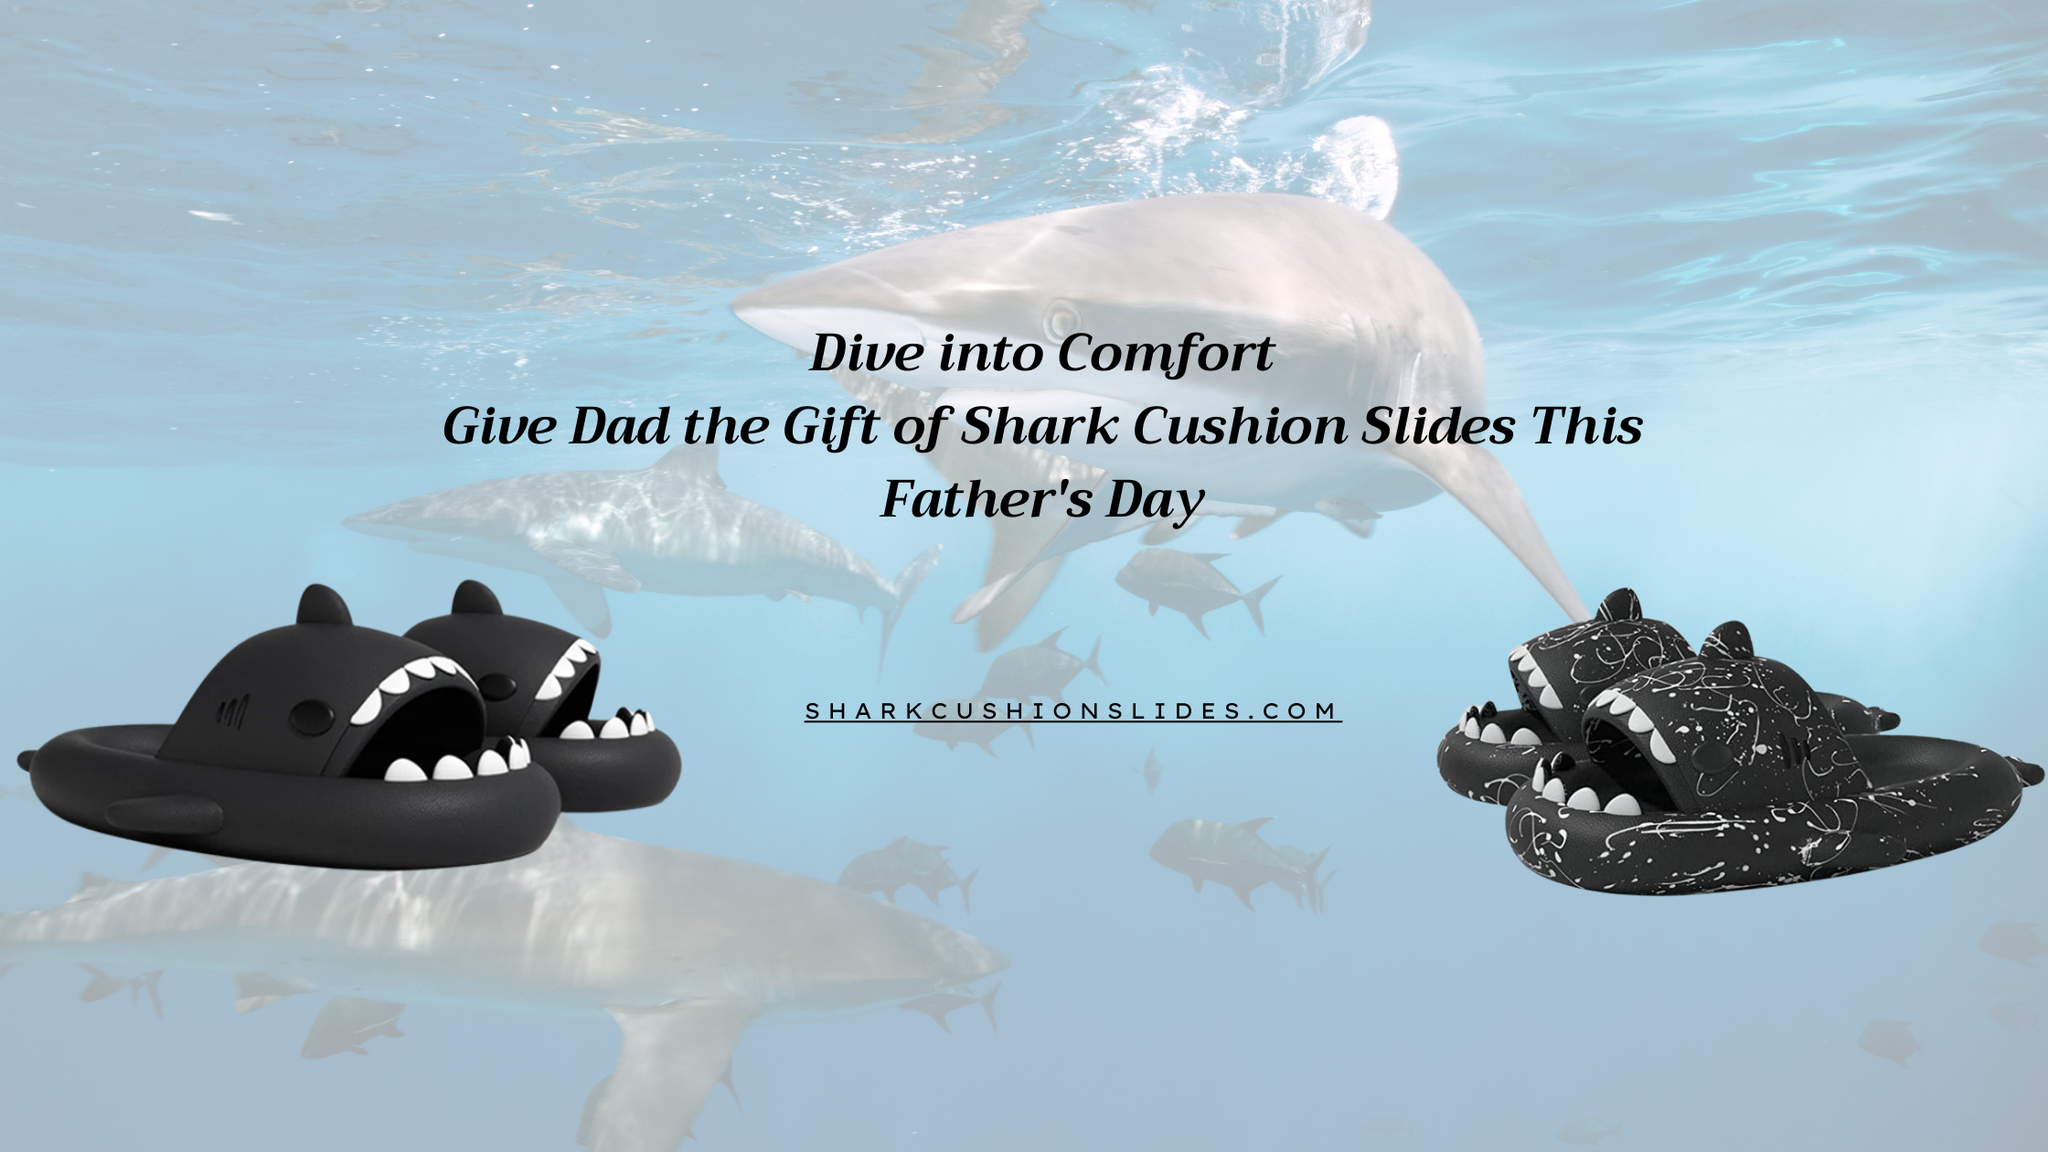 Dive into Comfort: Give Dad the Gift of Shark Cushion Slides This Father's Day